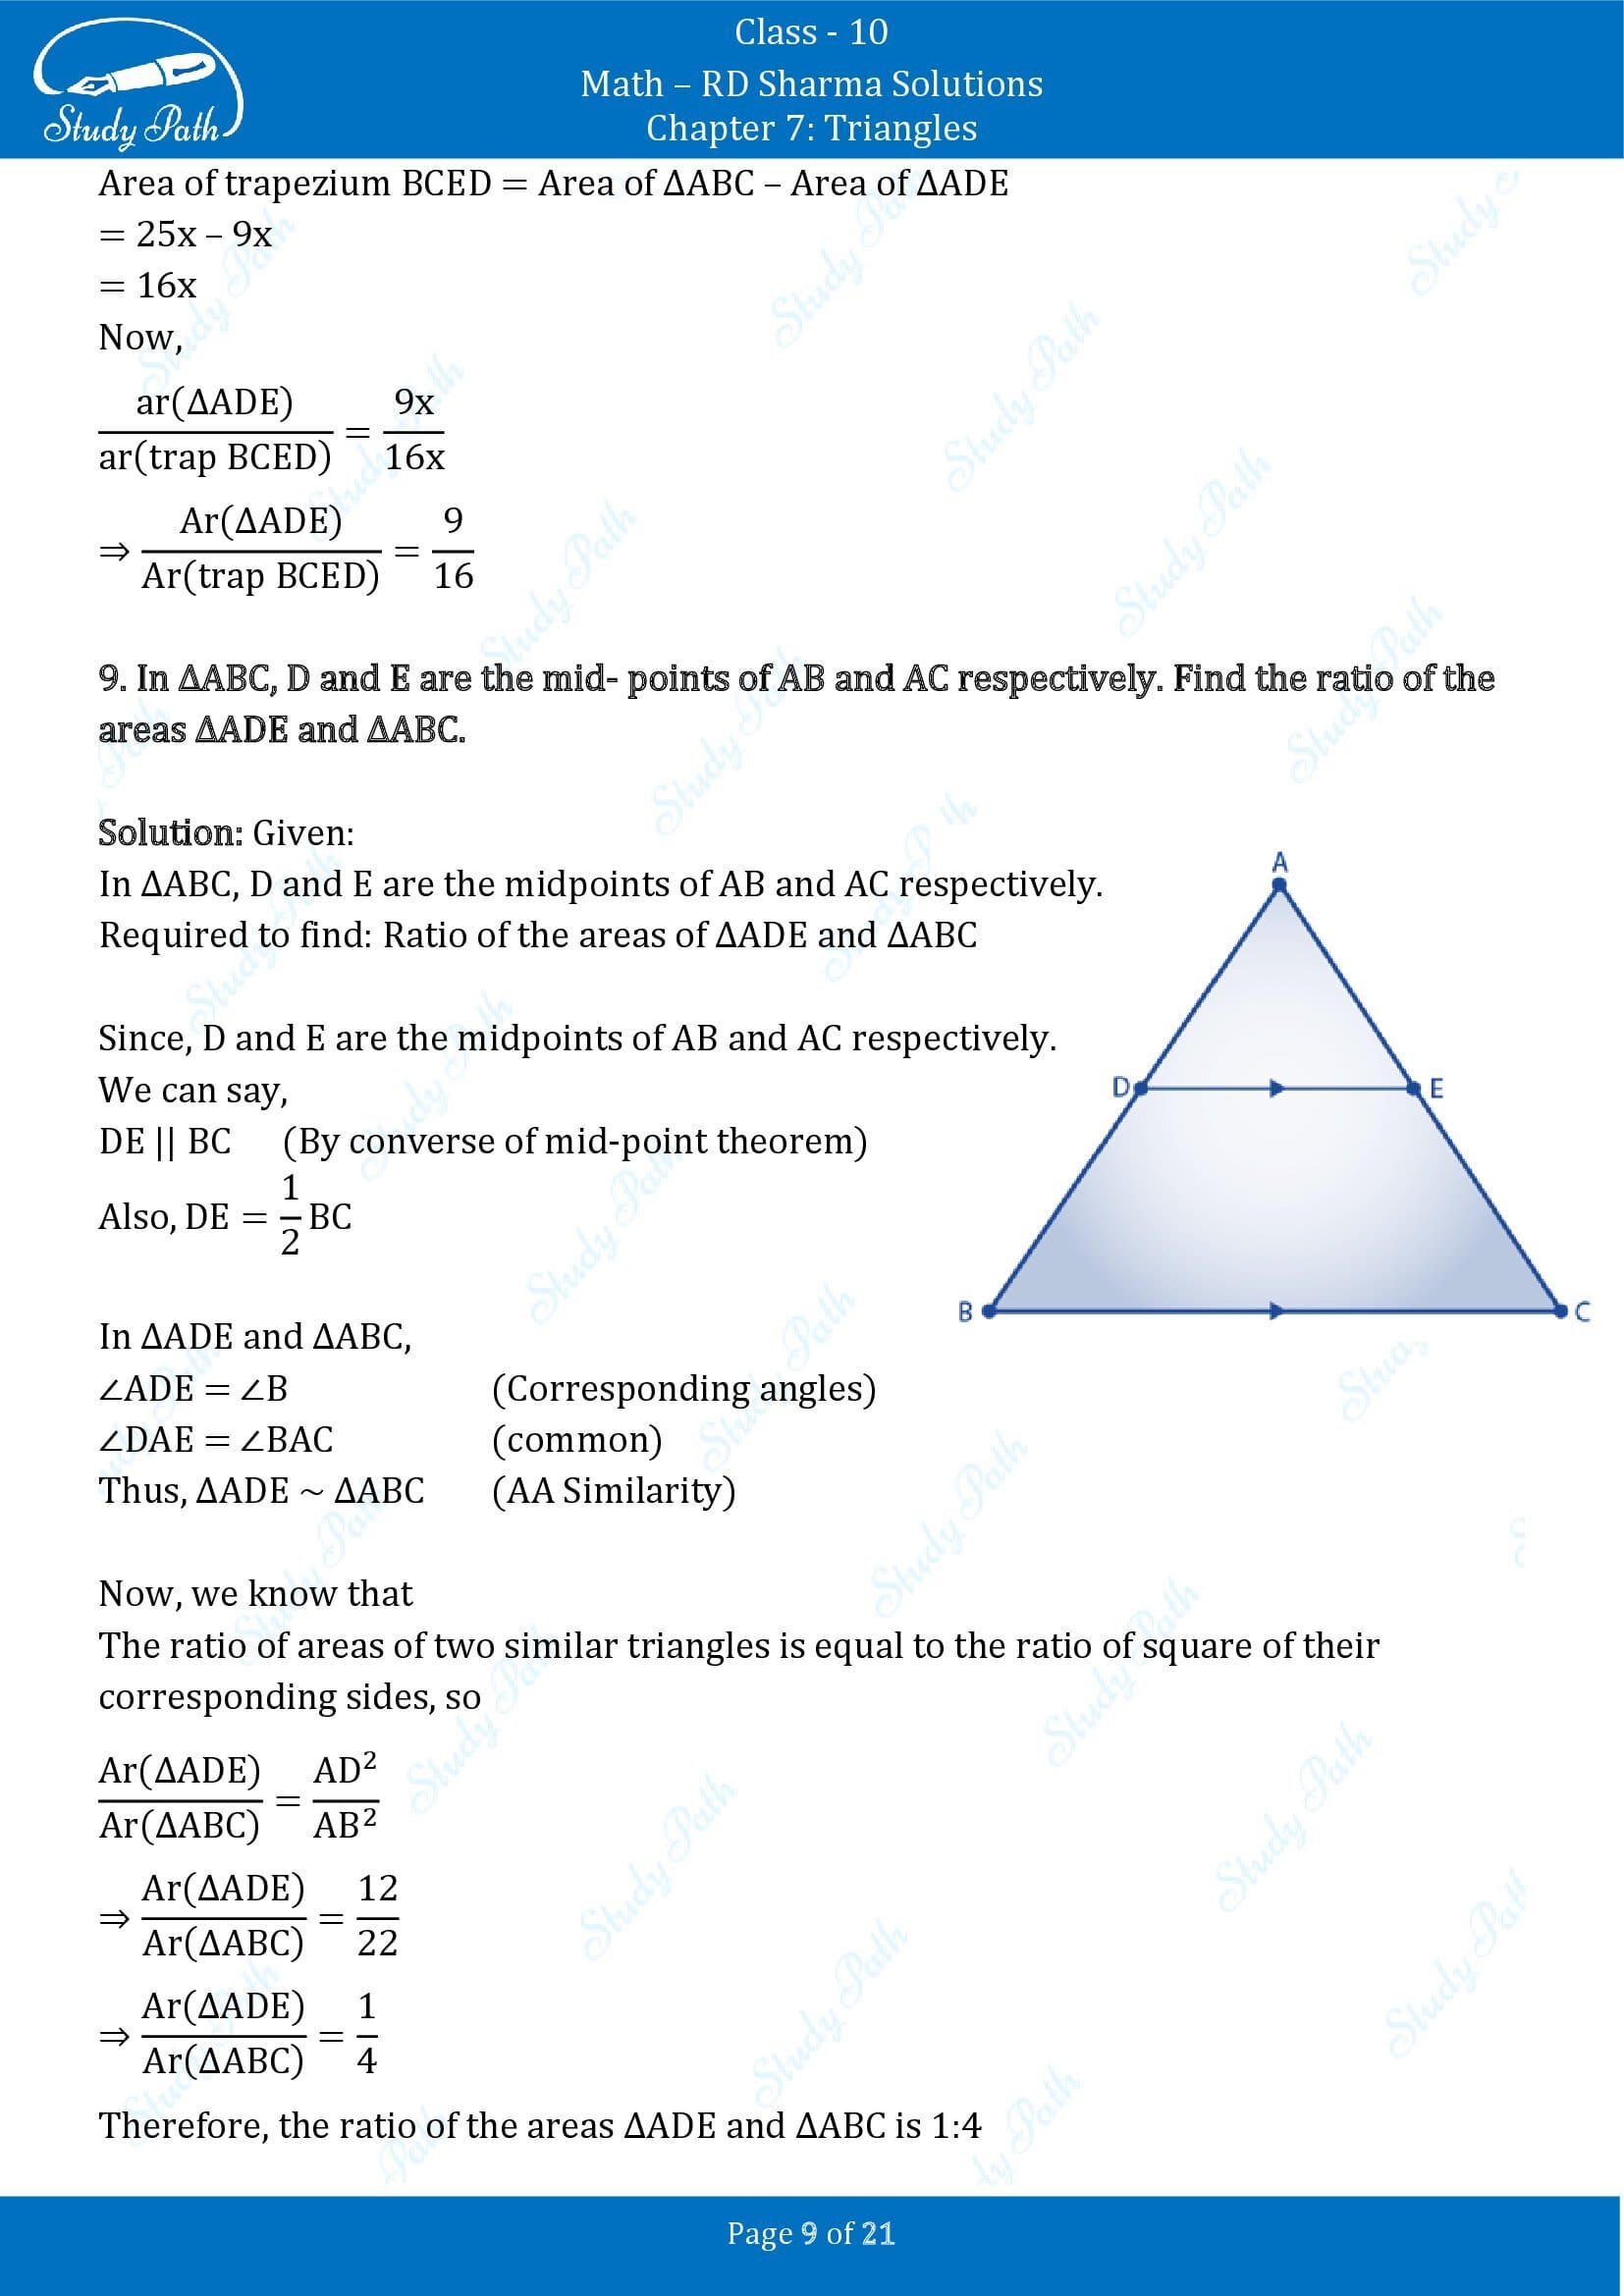 RD Sharma Solutions Class 10 Chapter 7 Triangles Exercise 7.6 00009